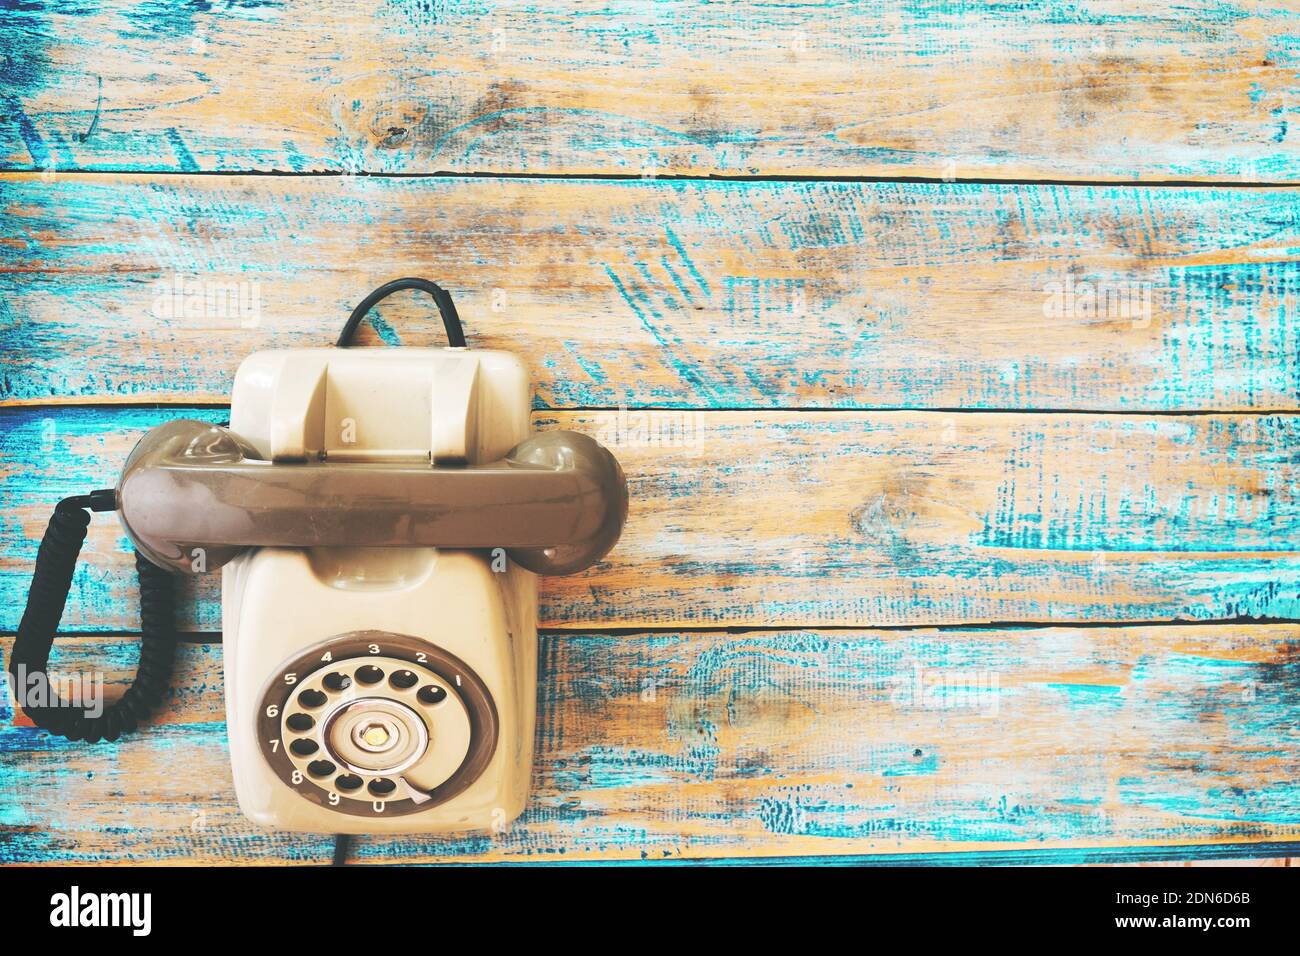 Download Top View Hero Header Retro Technology Of Vintage Telephone On Blue Paint Color Wood Table Vintage Color Effect Styles Stock Photo Alamy